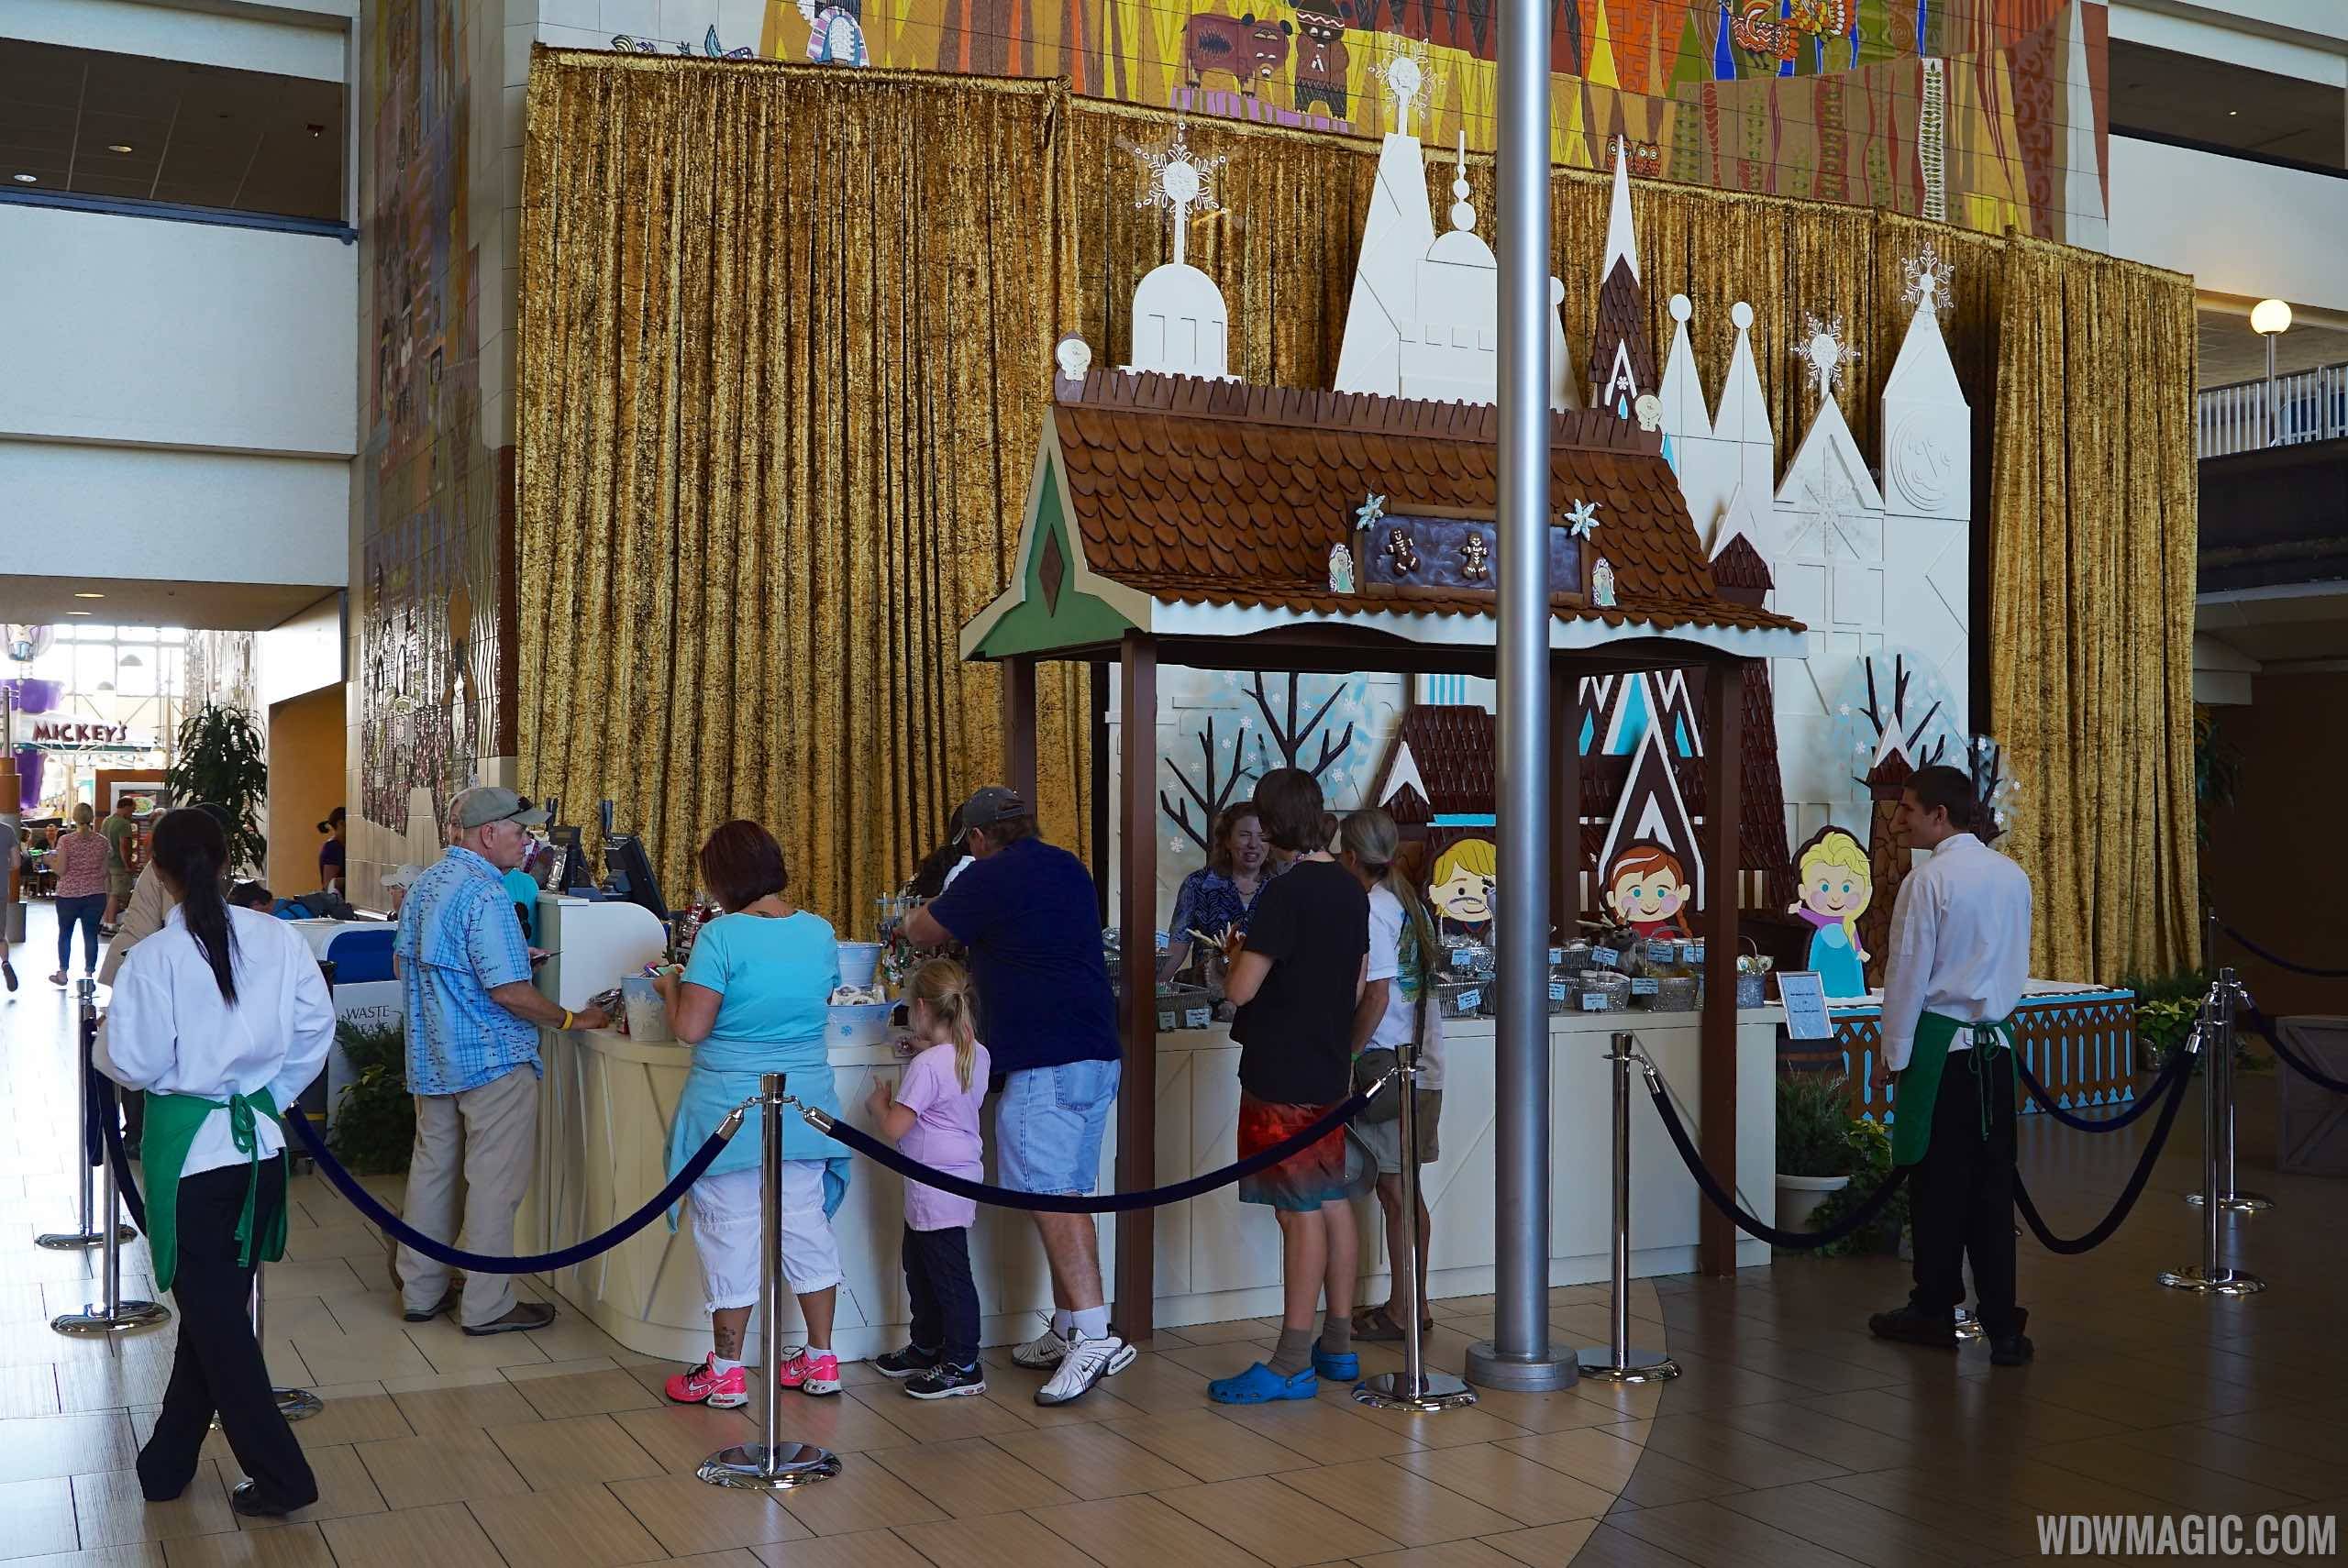 Disney's Contemporary Resort 2014 'Frozen' themed Gingerbread House